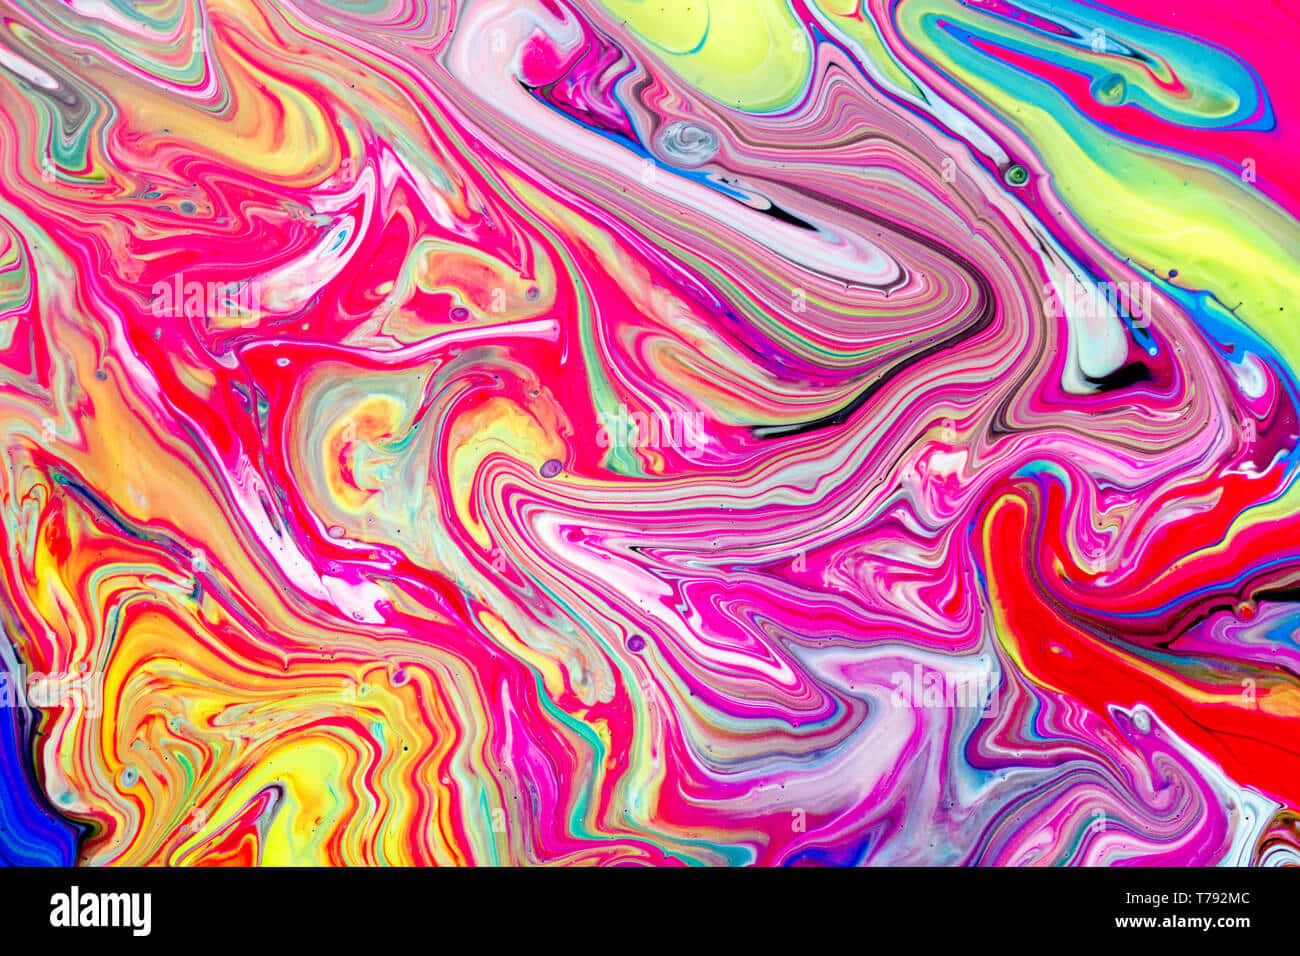 Find yourself mesmerized with this colorful pattern! Wallpaper